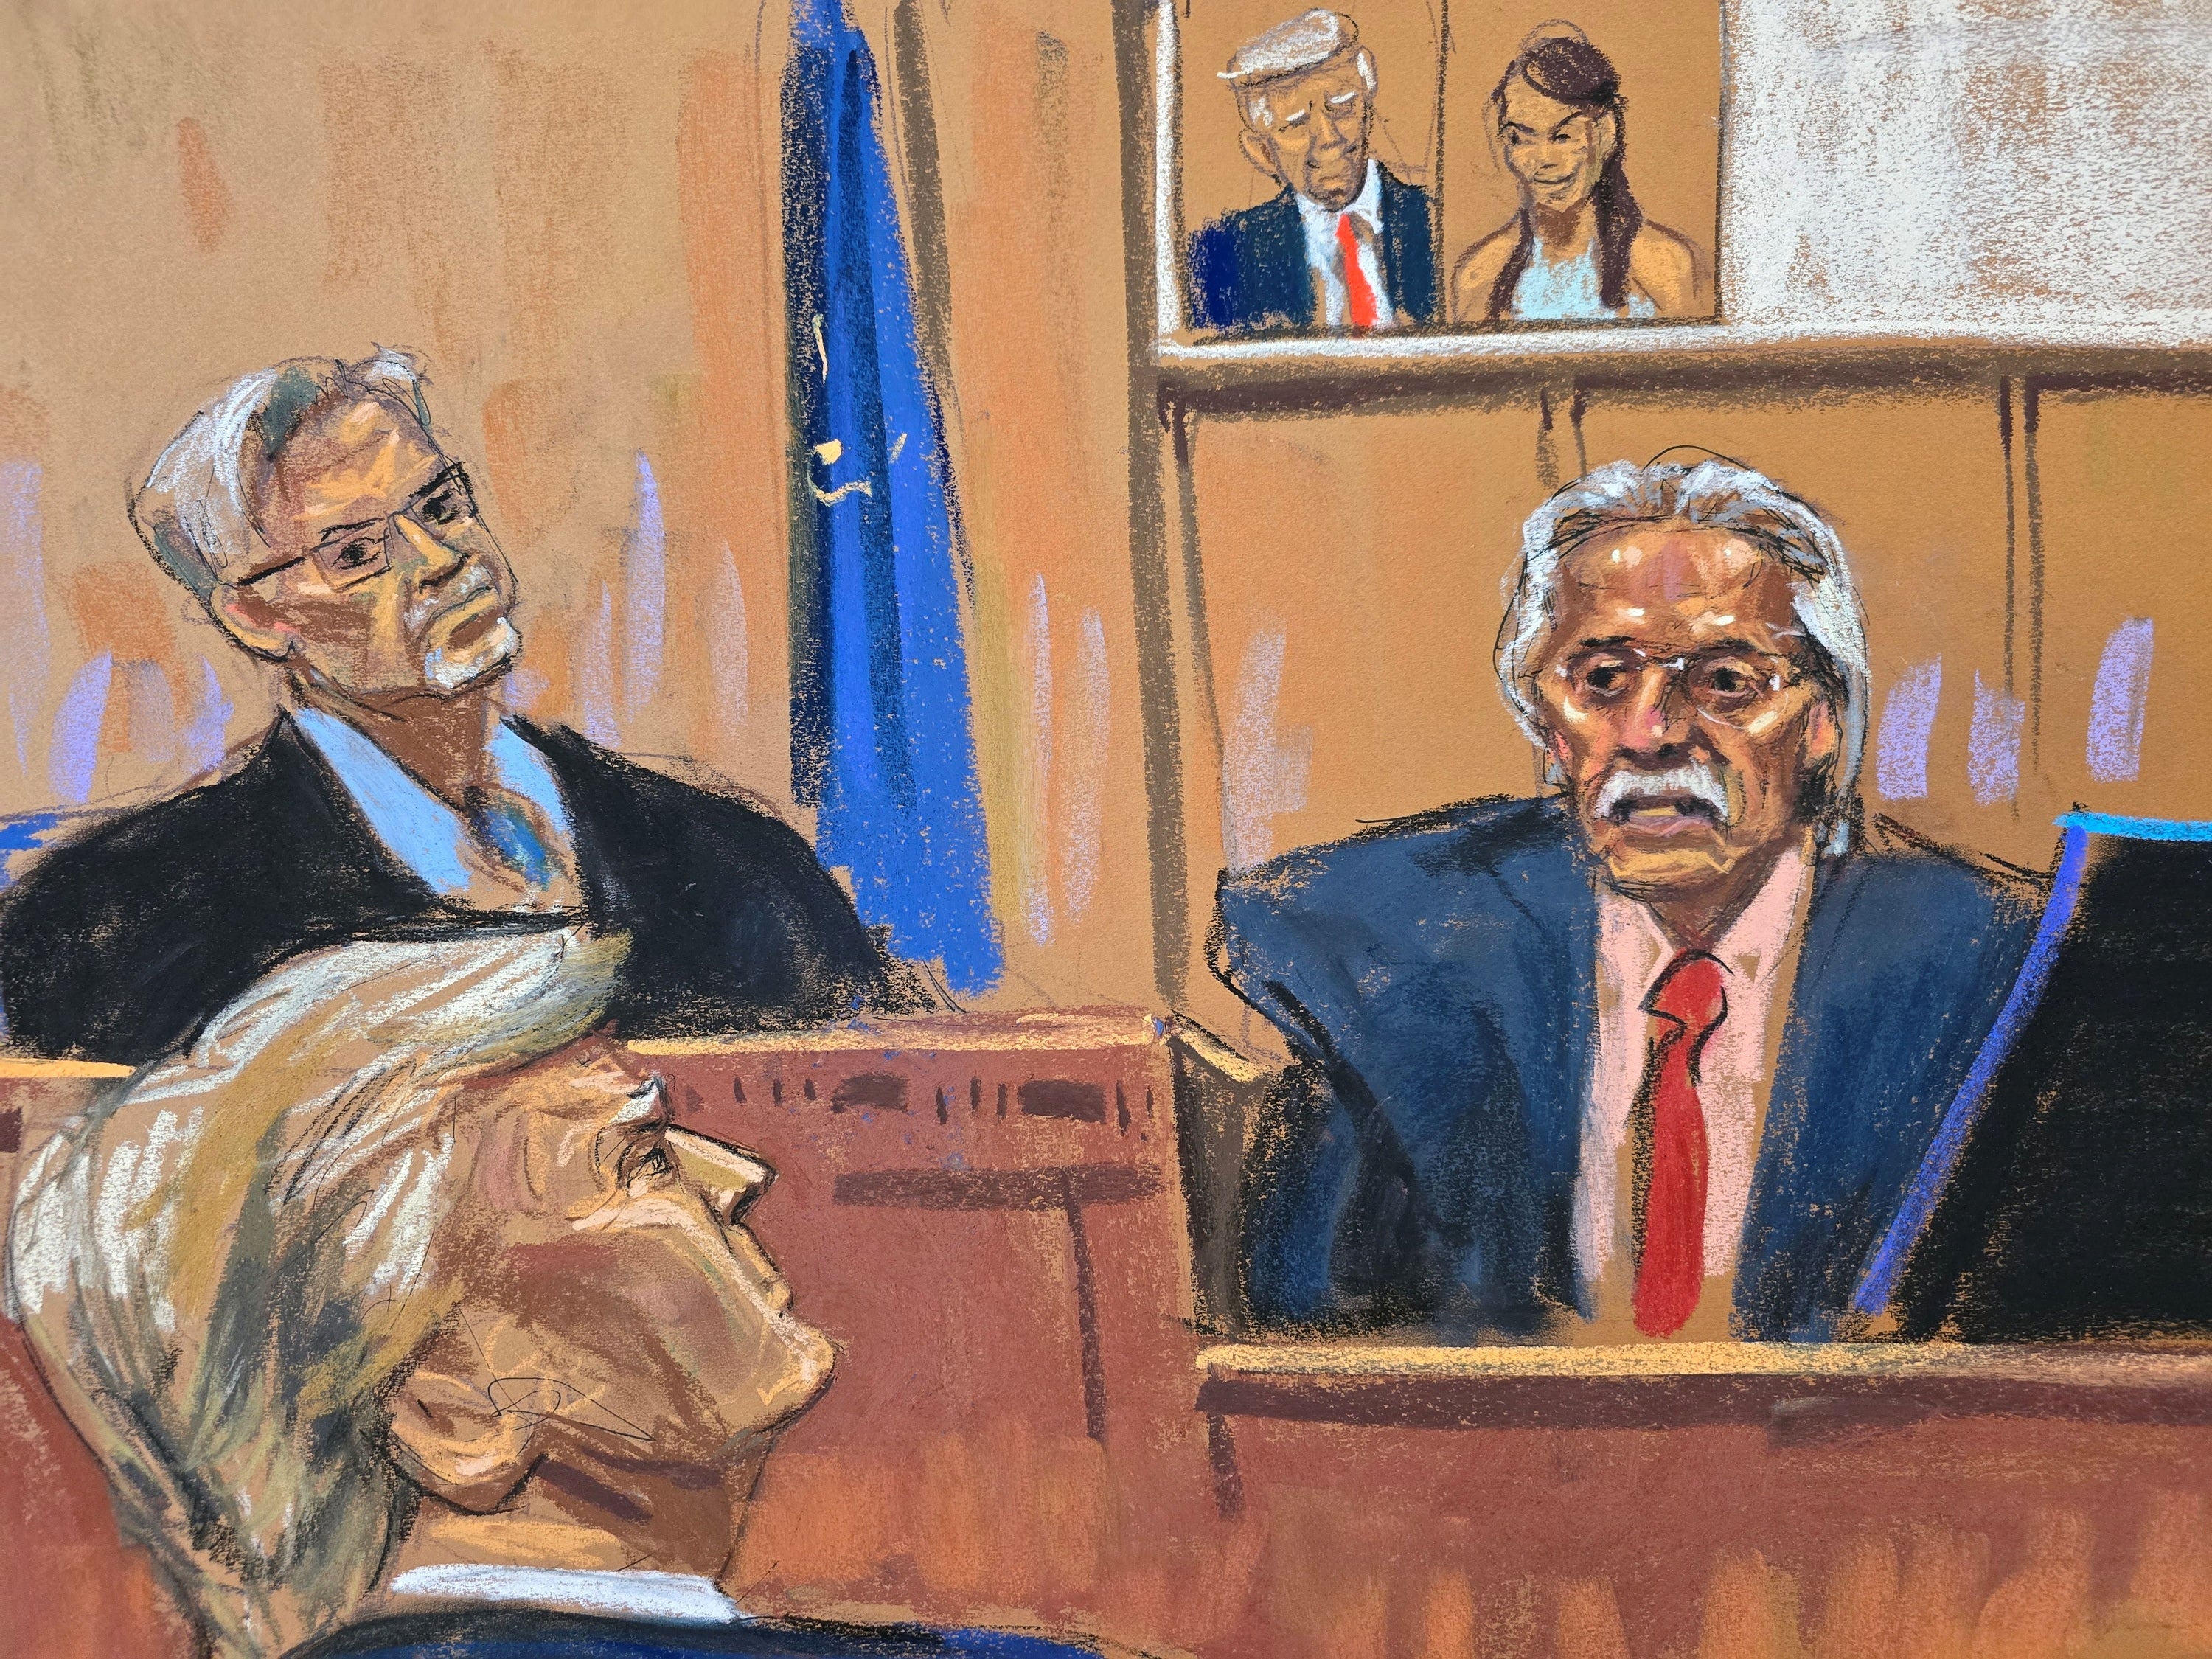 National Enquirer publisher David Pecker on the witness stand, whose exhaustive testimony took almost the entire second week in court